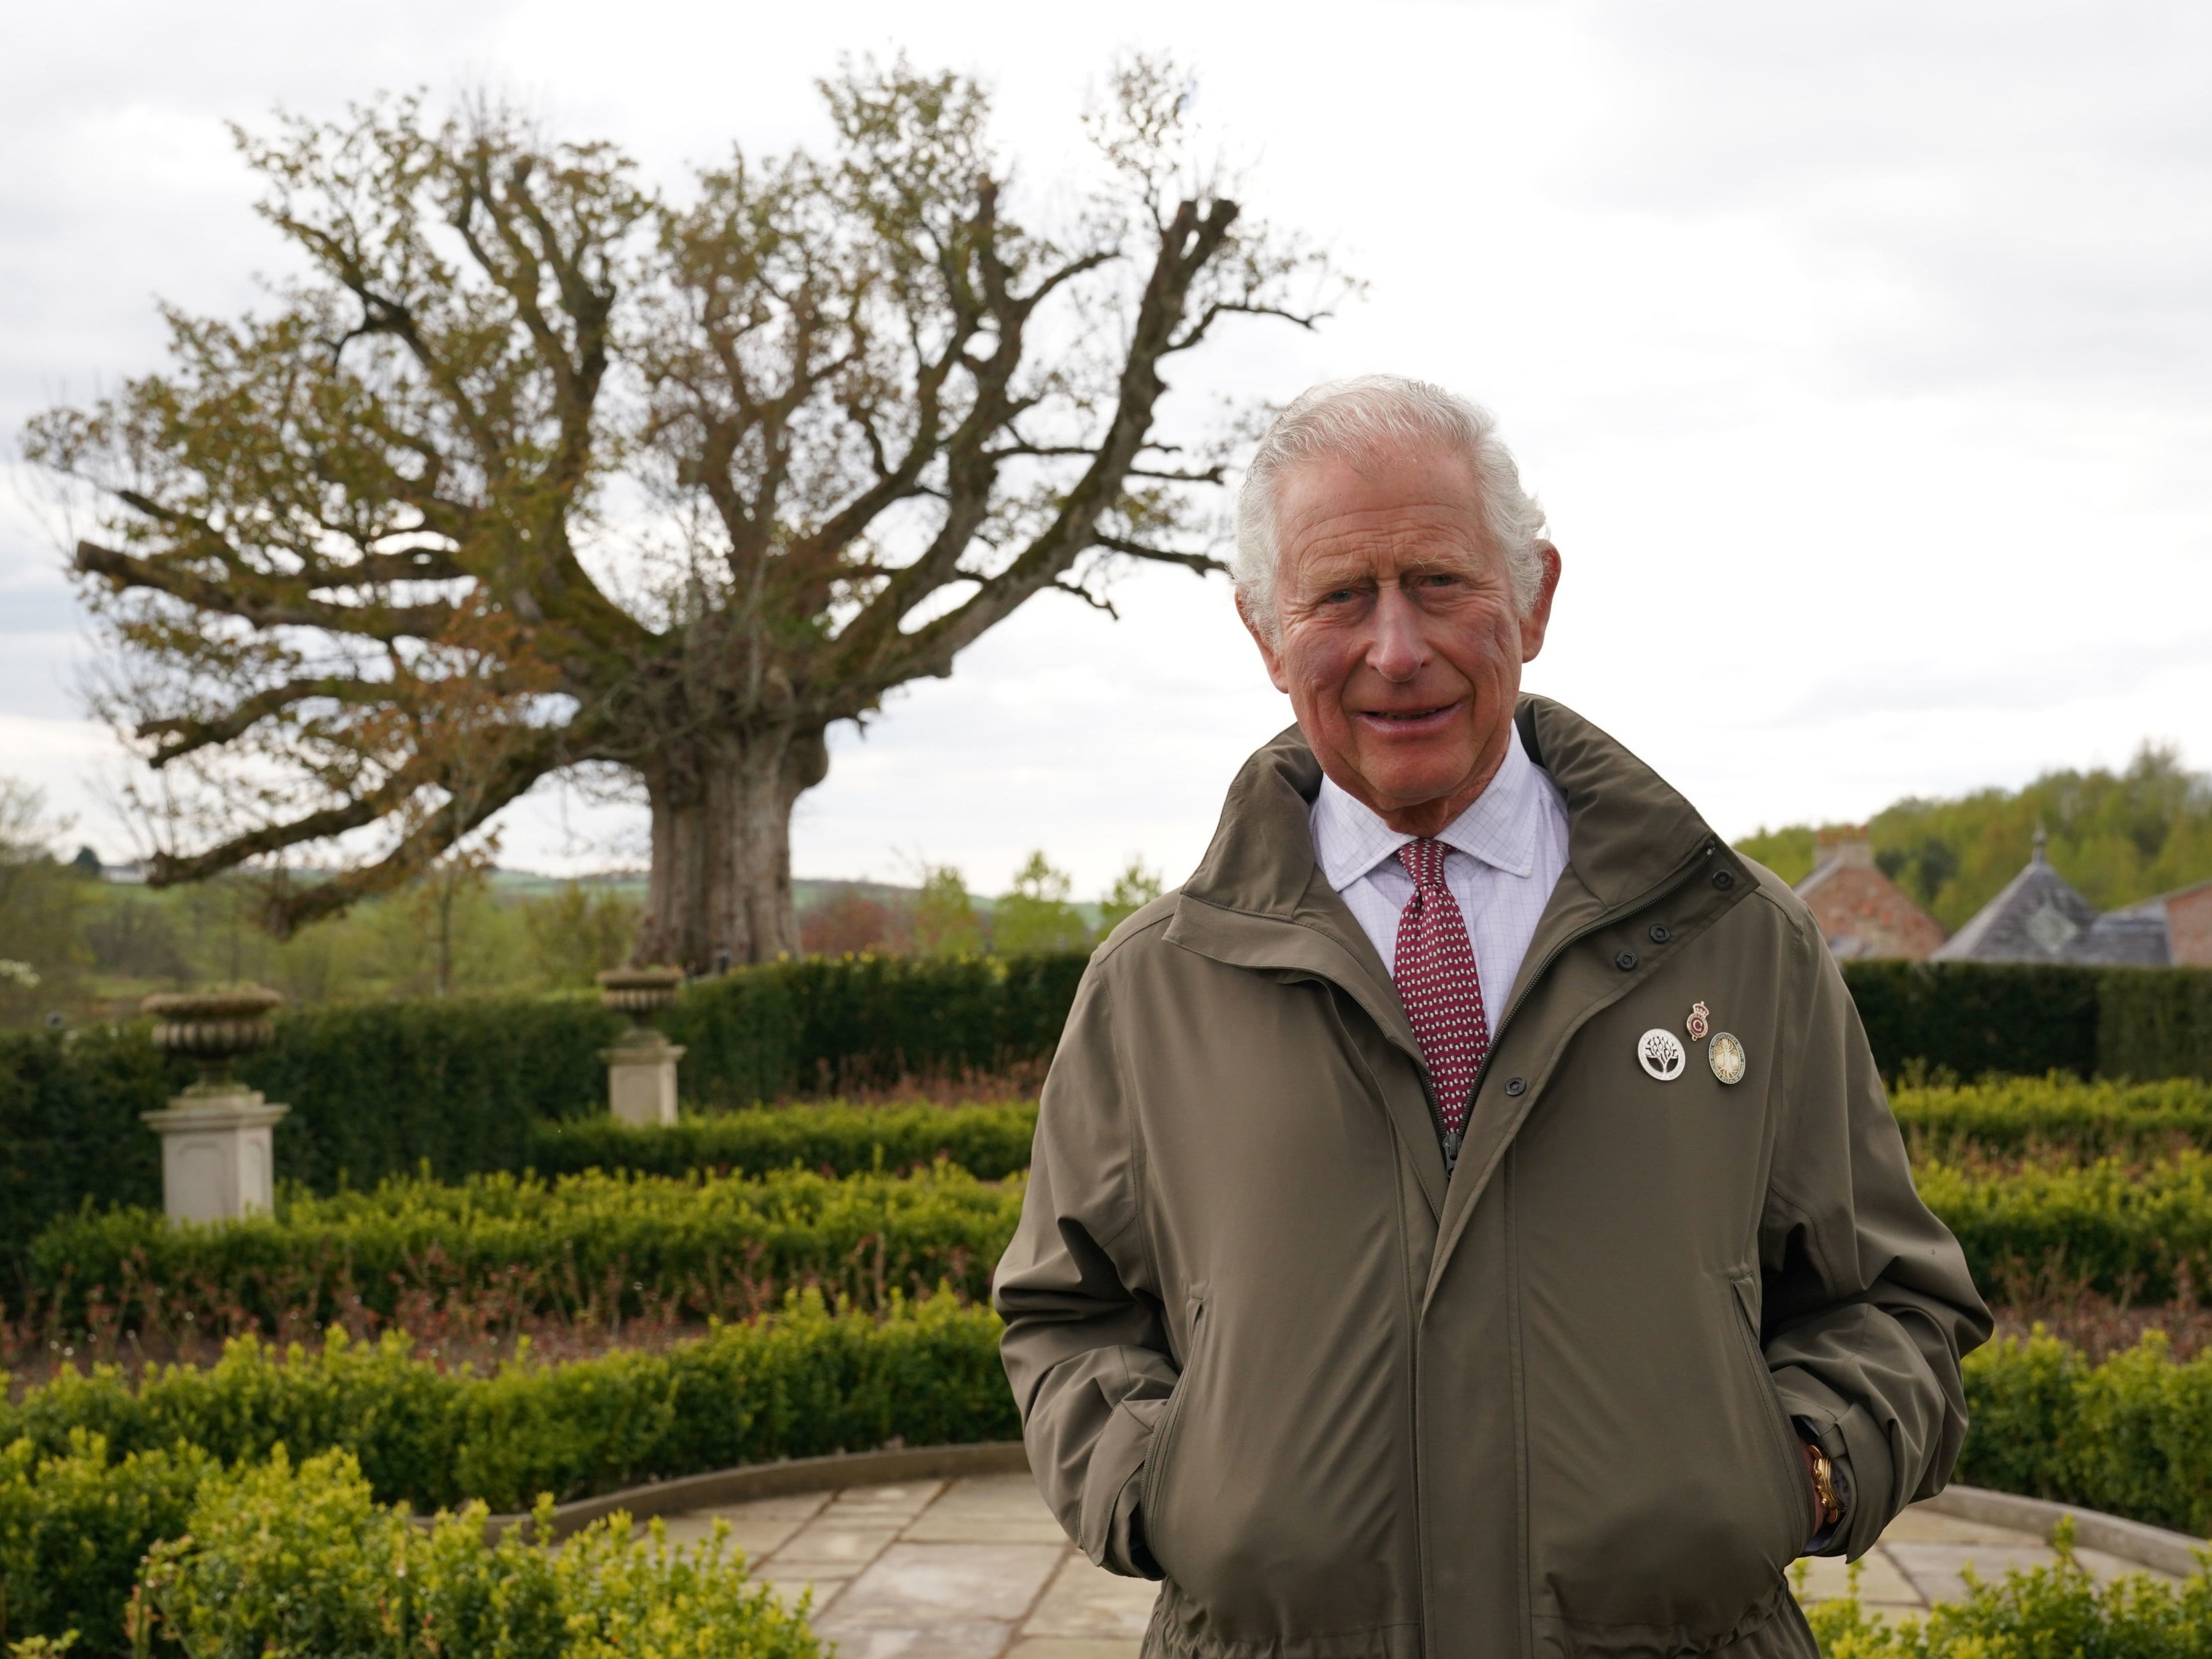 The Prince of Wales stands beside the ‘Old Sycamore’ in the Dumfries House garden